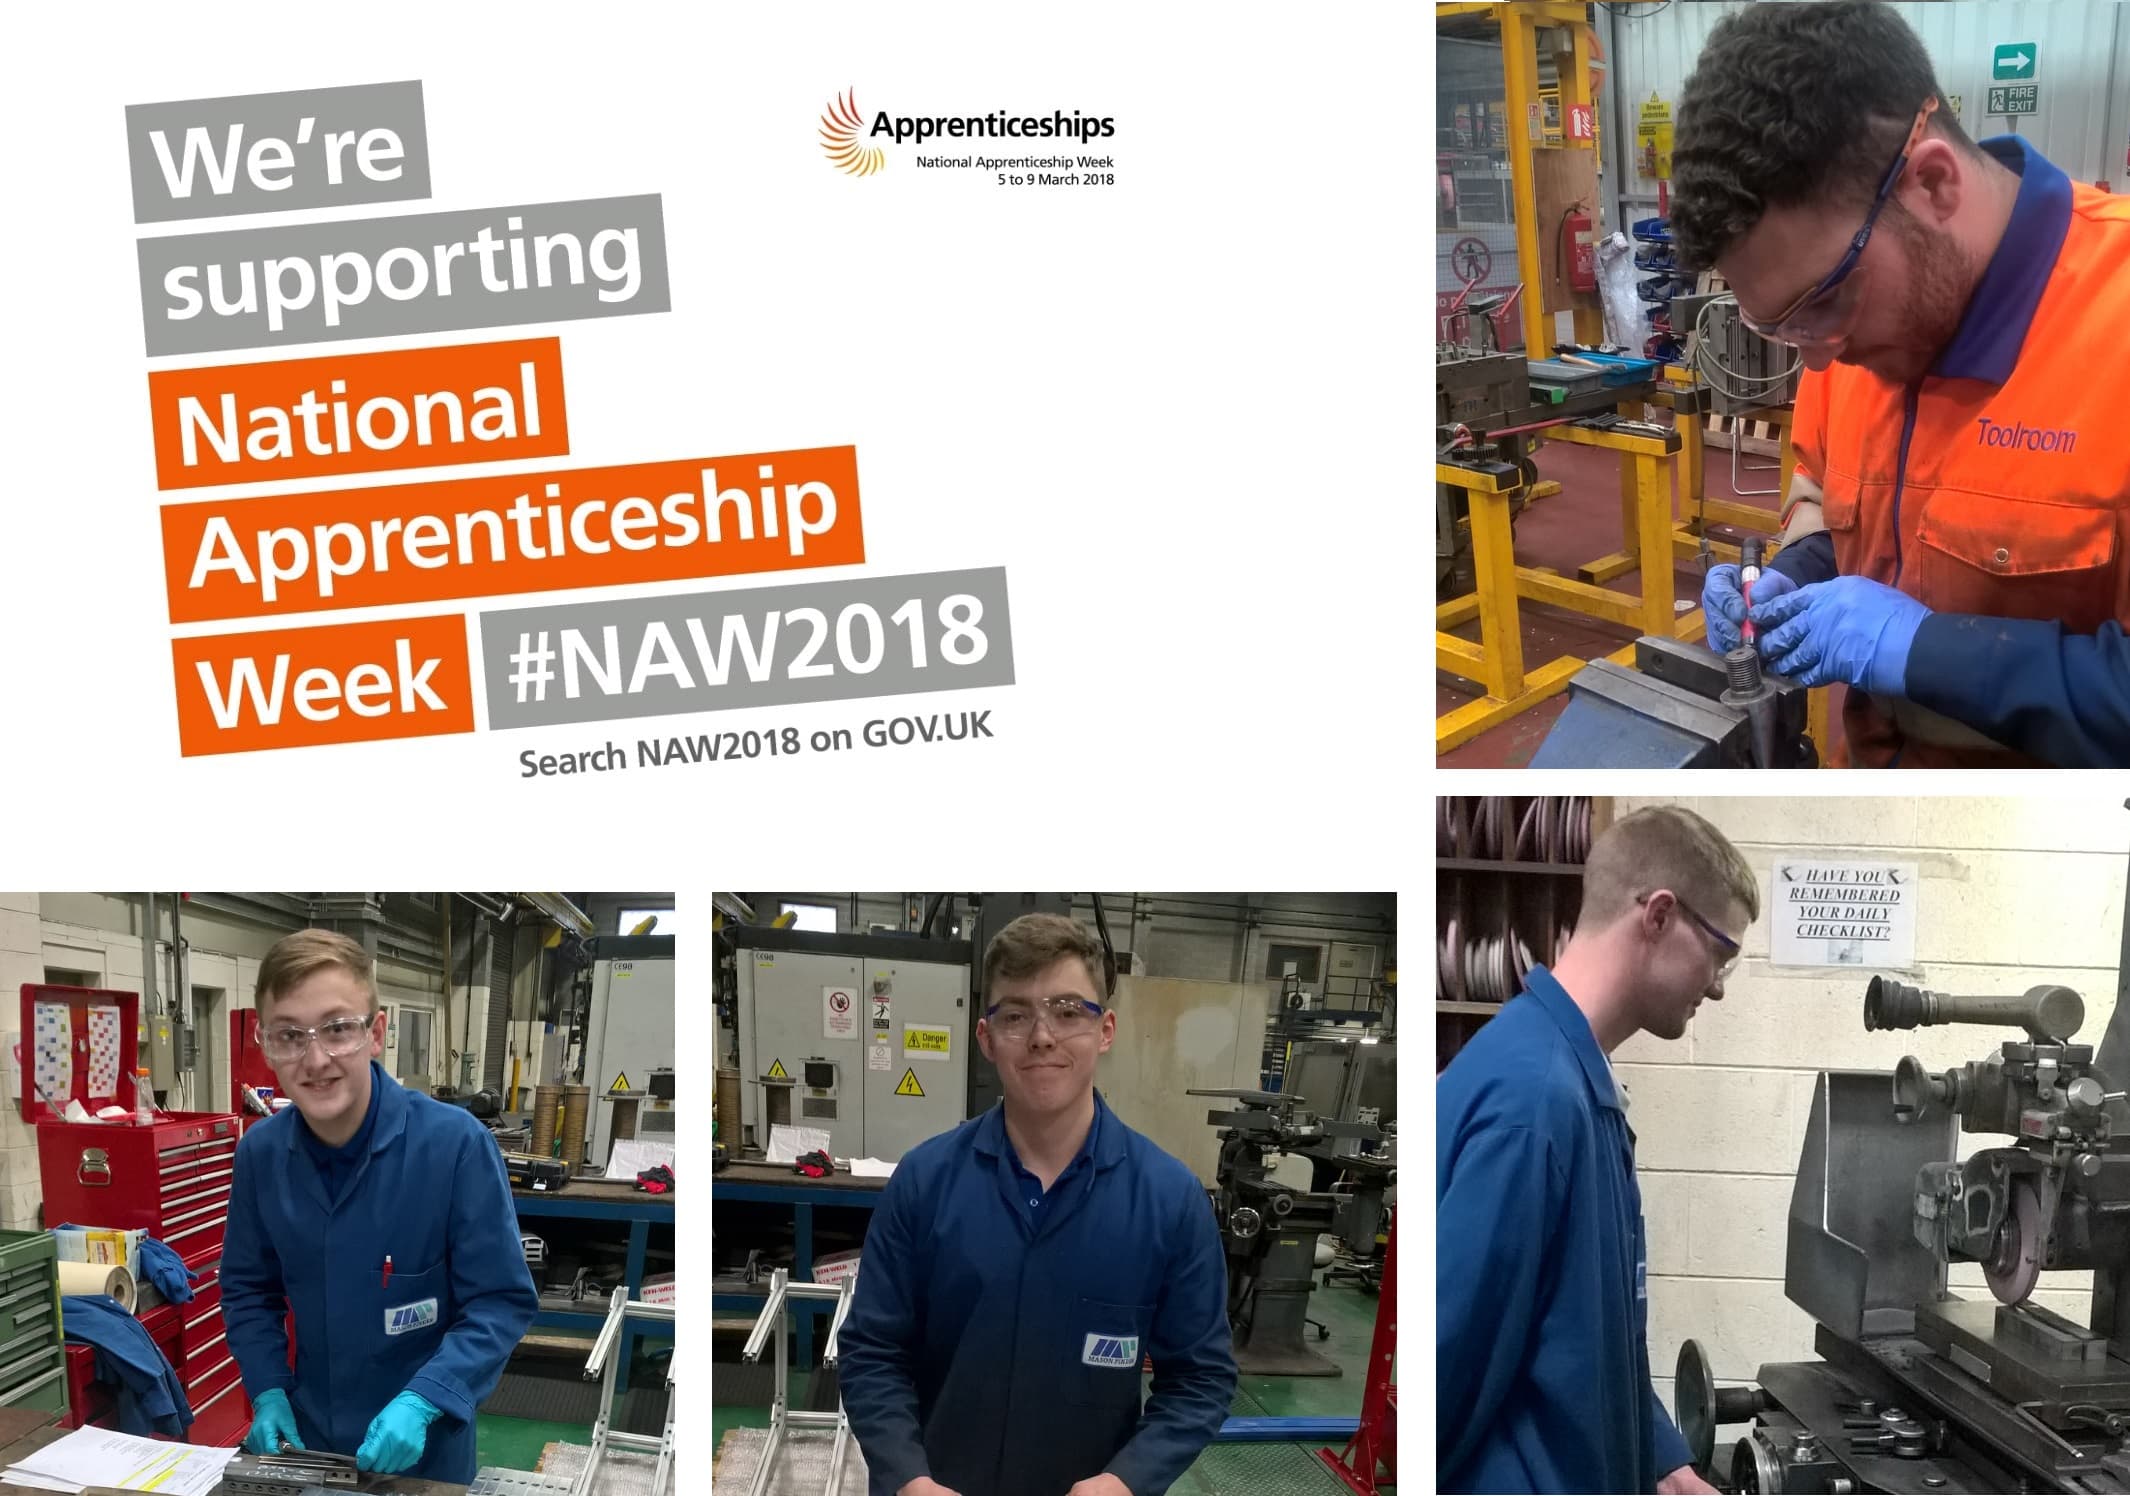 We are supporting National Apprenticeship Week #NAW18